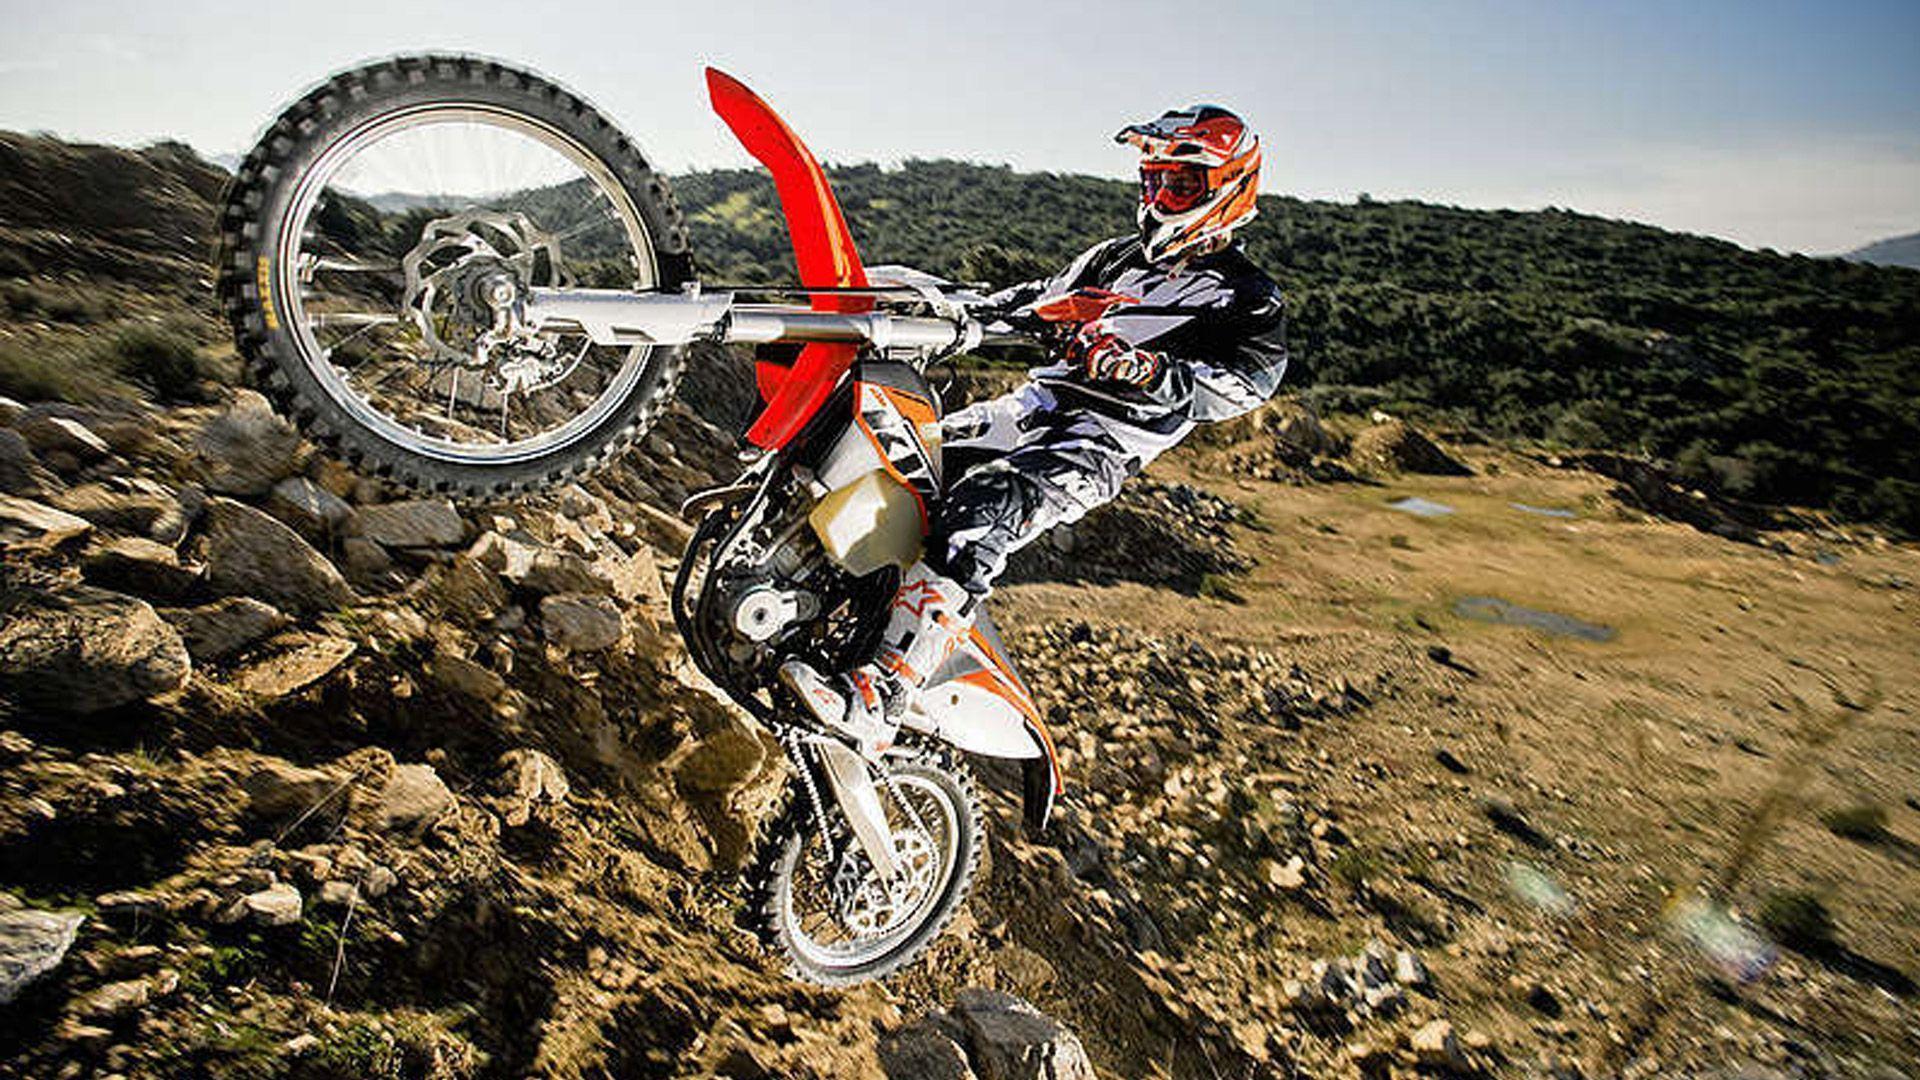 review 2014 KTM 350 EXC F 2014 KTM 350 EXC F Specs and wallpaper